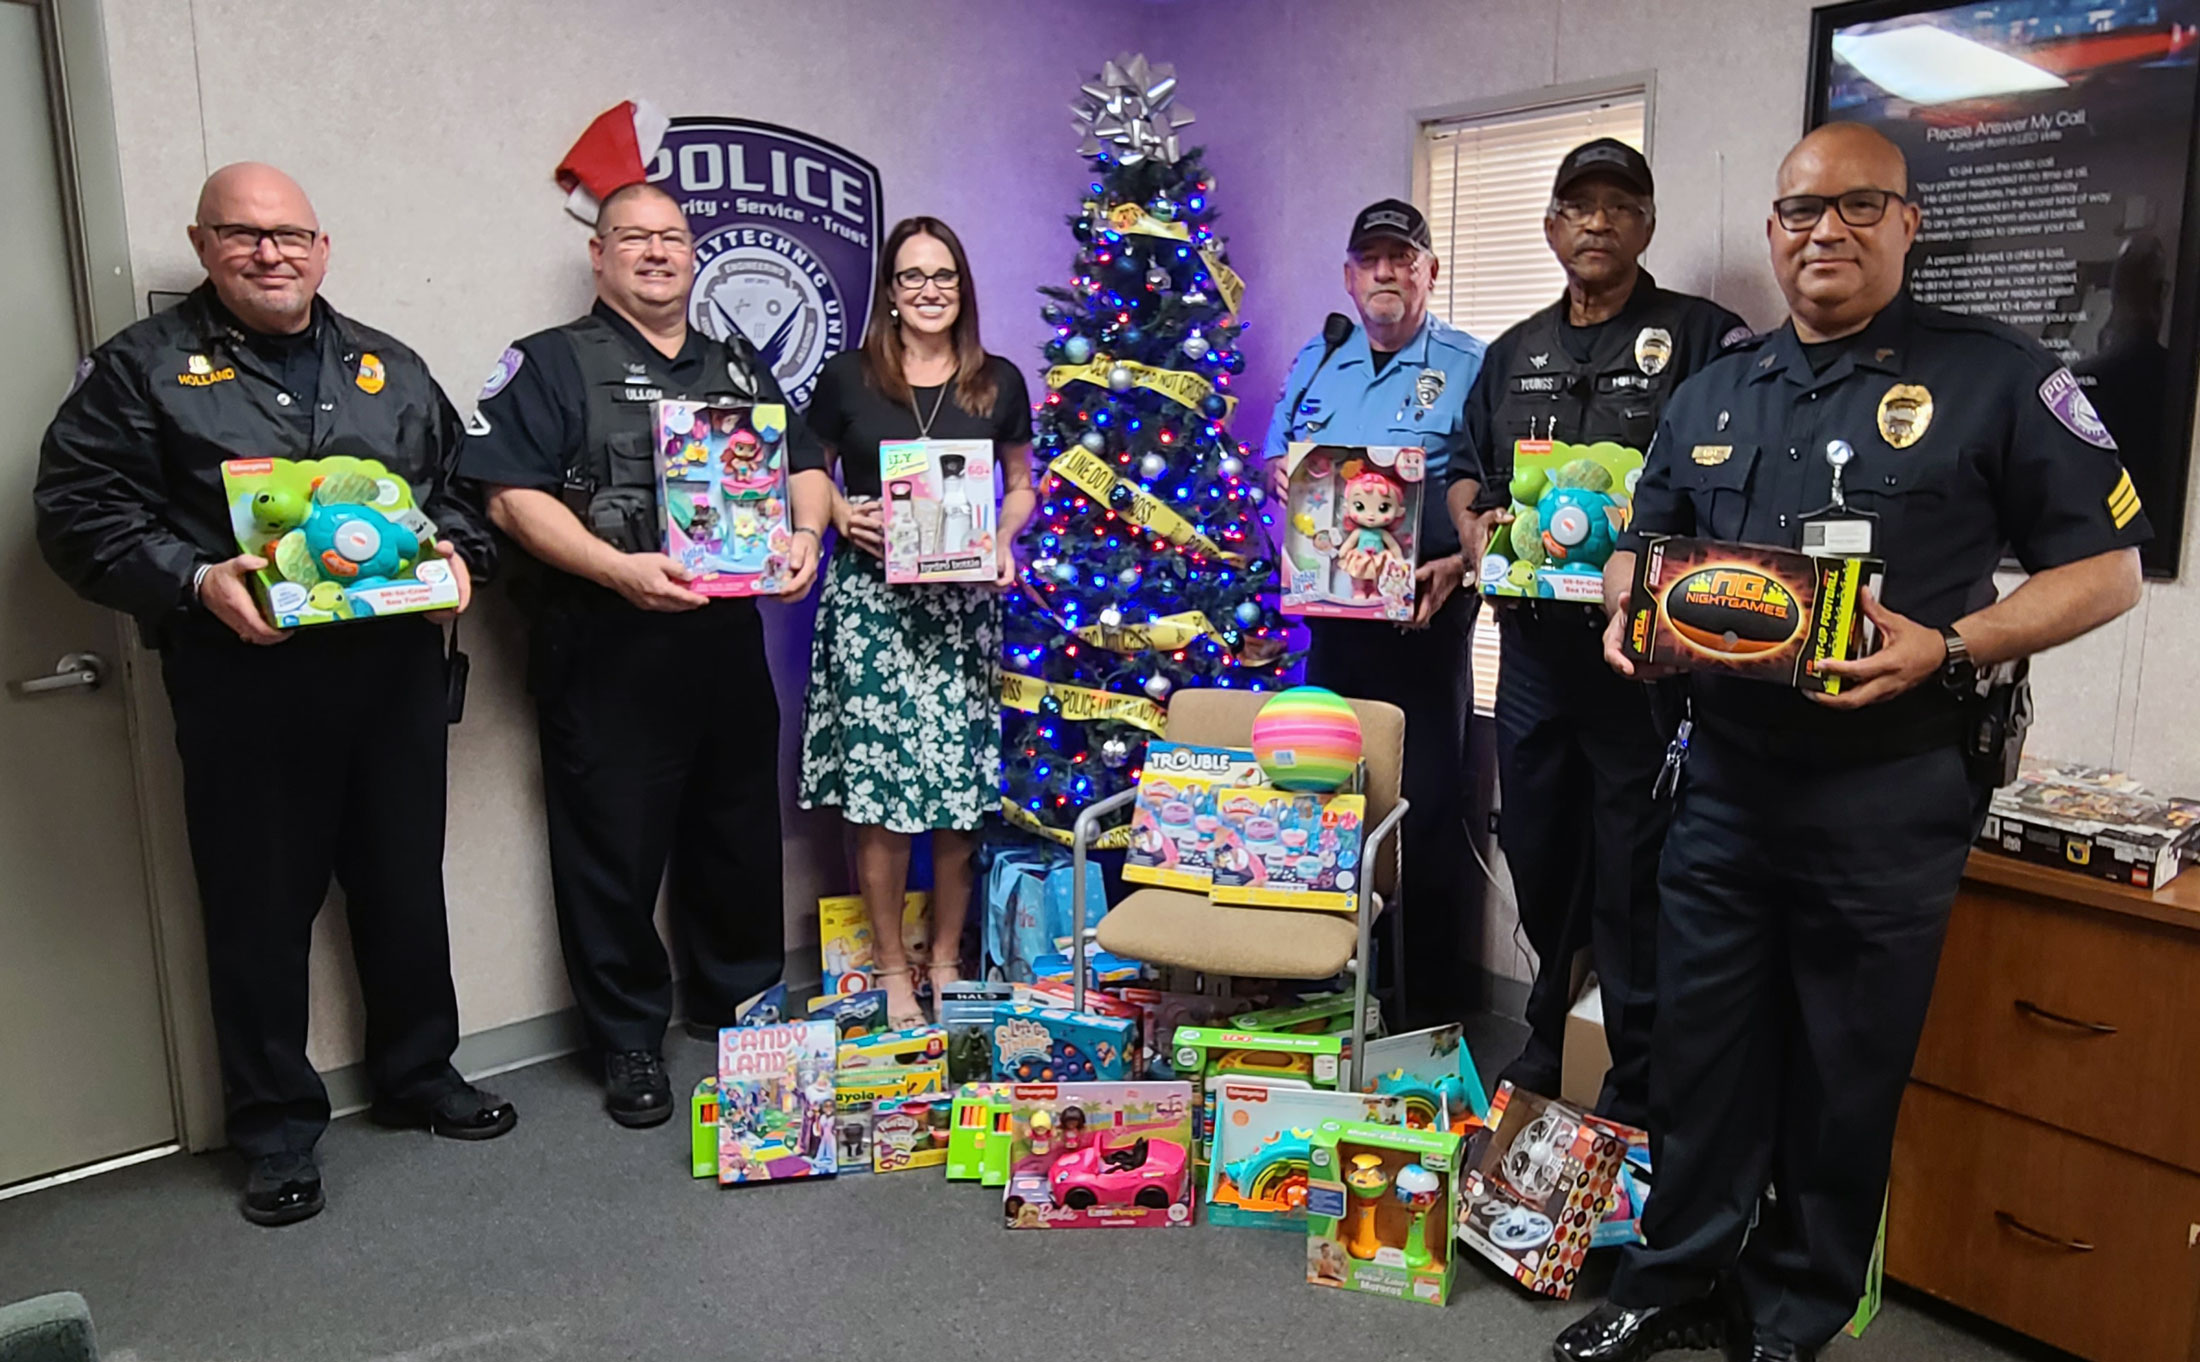 University Police Department members show the toys collected during their annual toy drive.